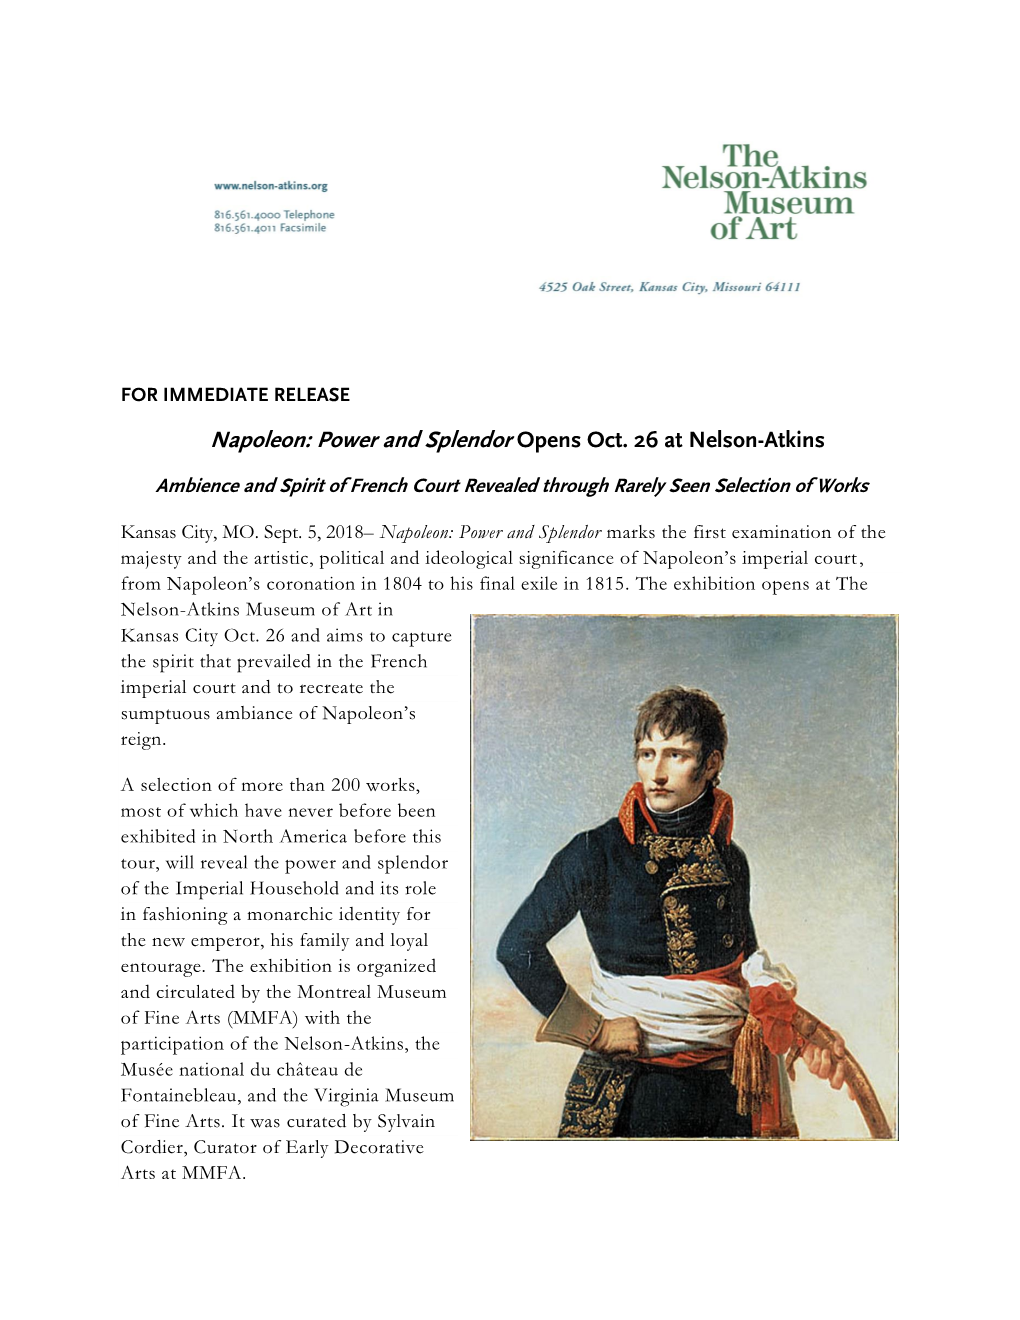 Napoleon: Power and Splendor Opens Oct. 26 at Nelson-Atkins